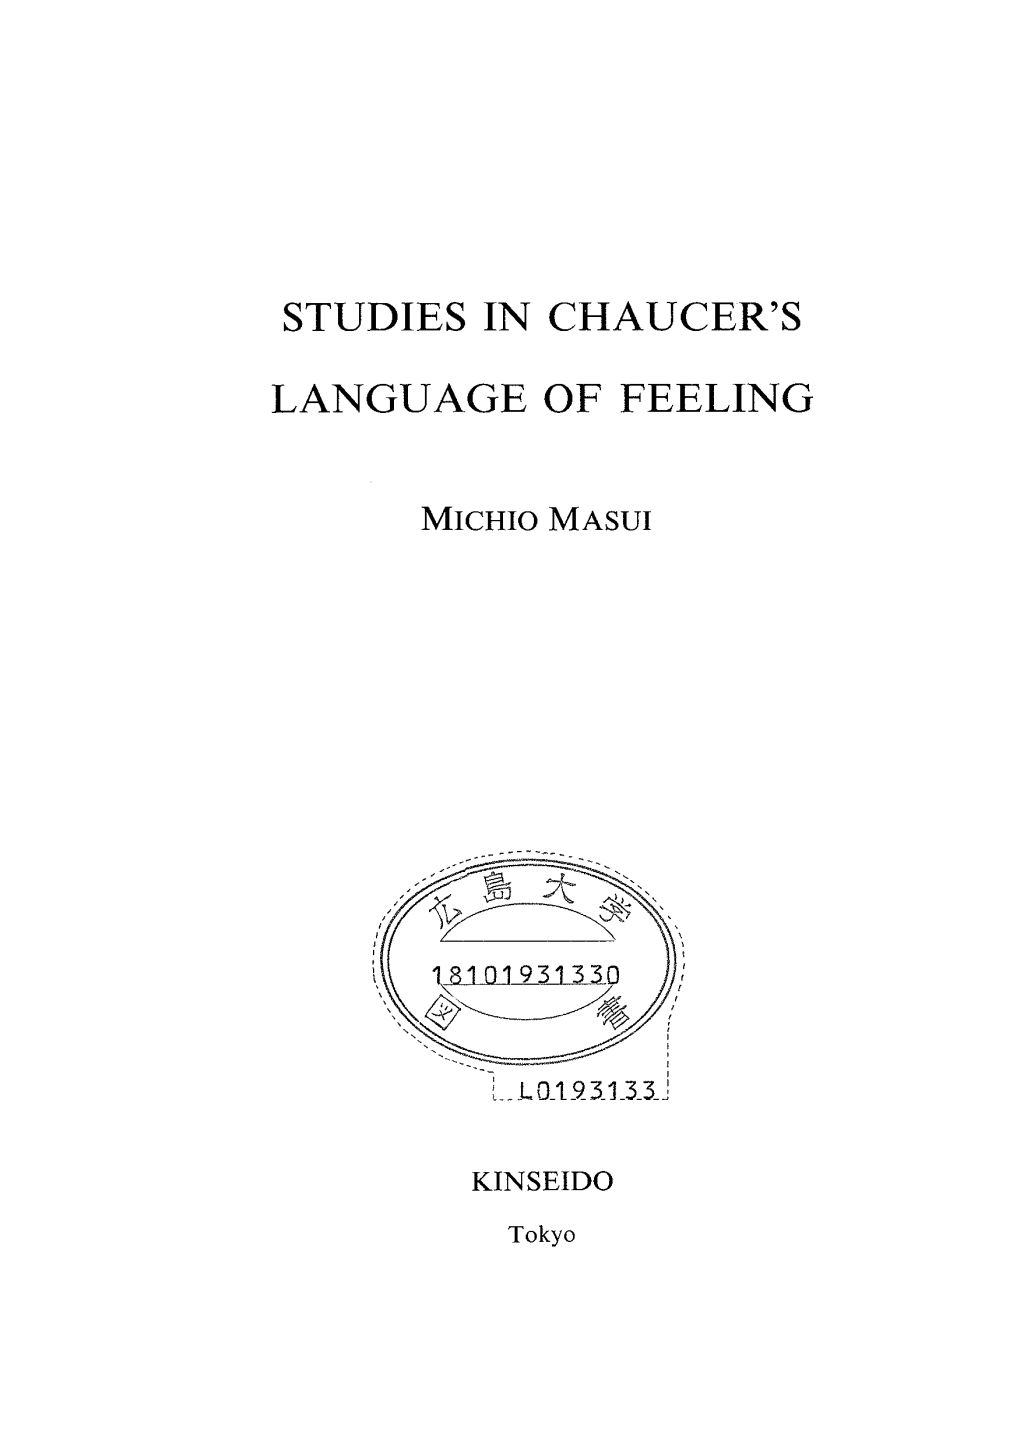 Studies in Chaucer's Language of Feeling,' in Accordance with the Suggestion of a Great Cambridge Chaucerian, Derek Brewer